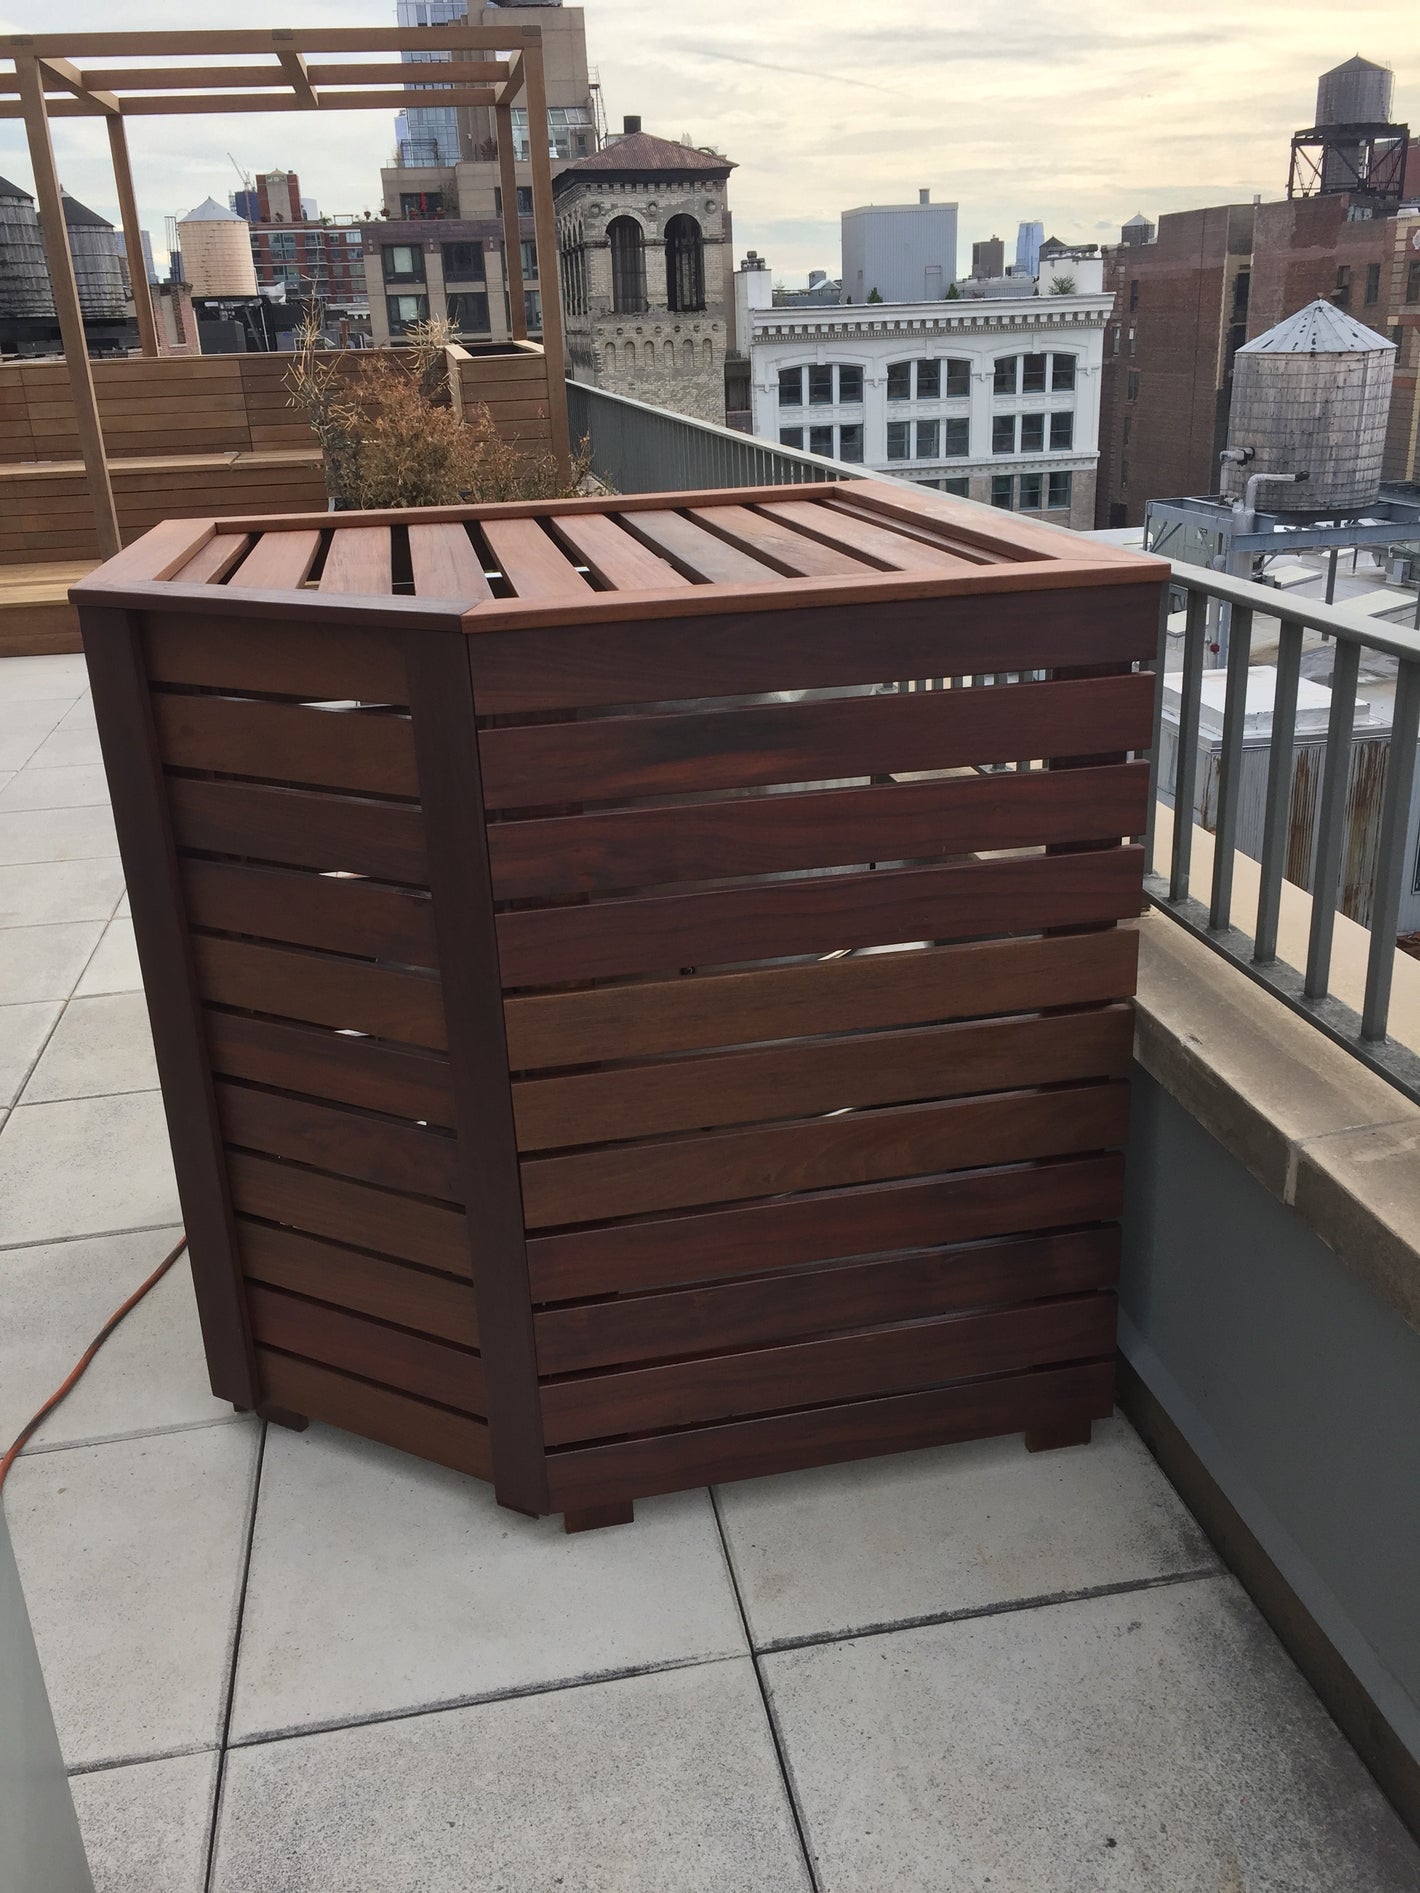 Custom Rooftop vent cover created by TCSC